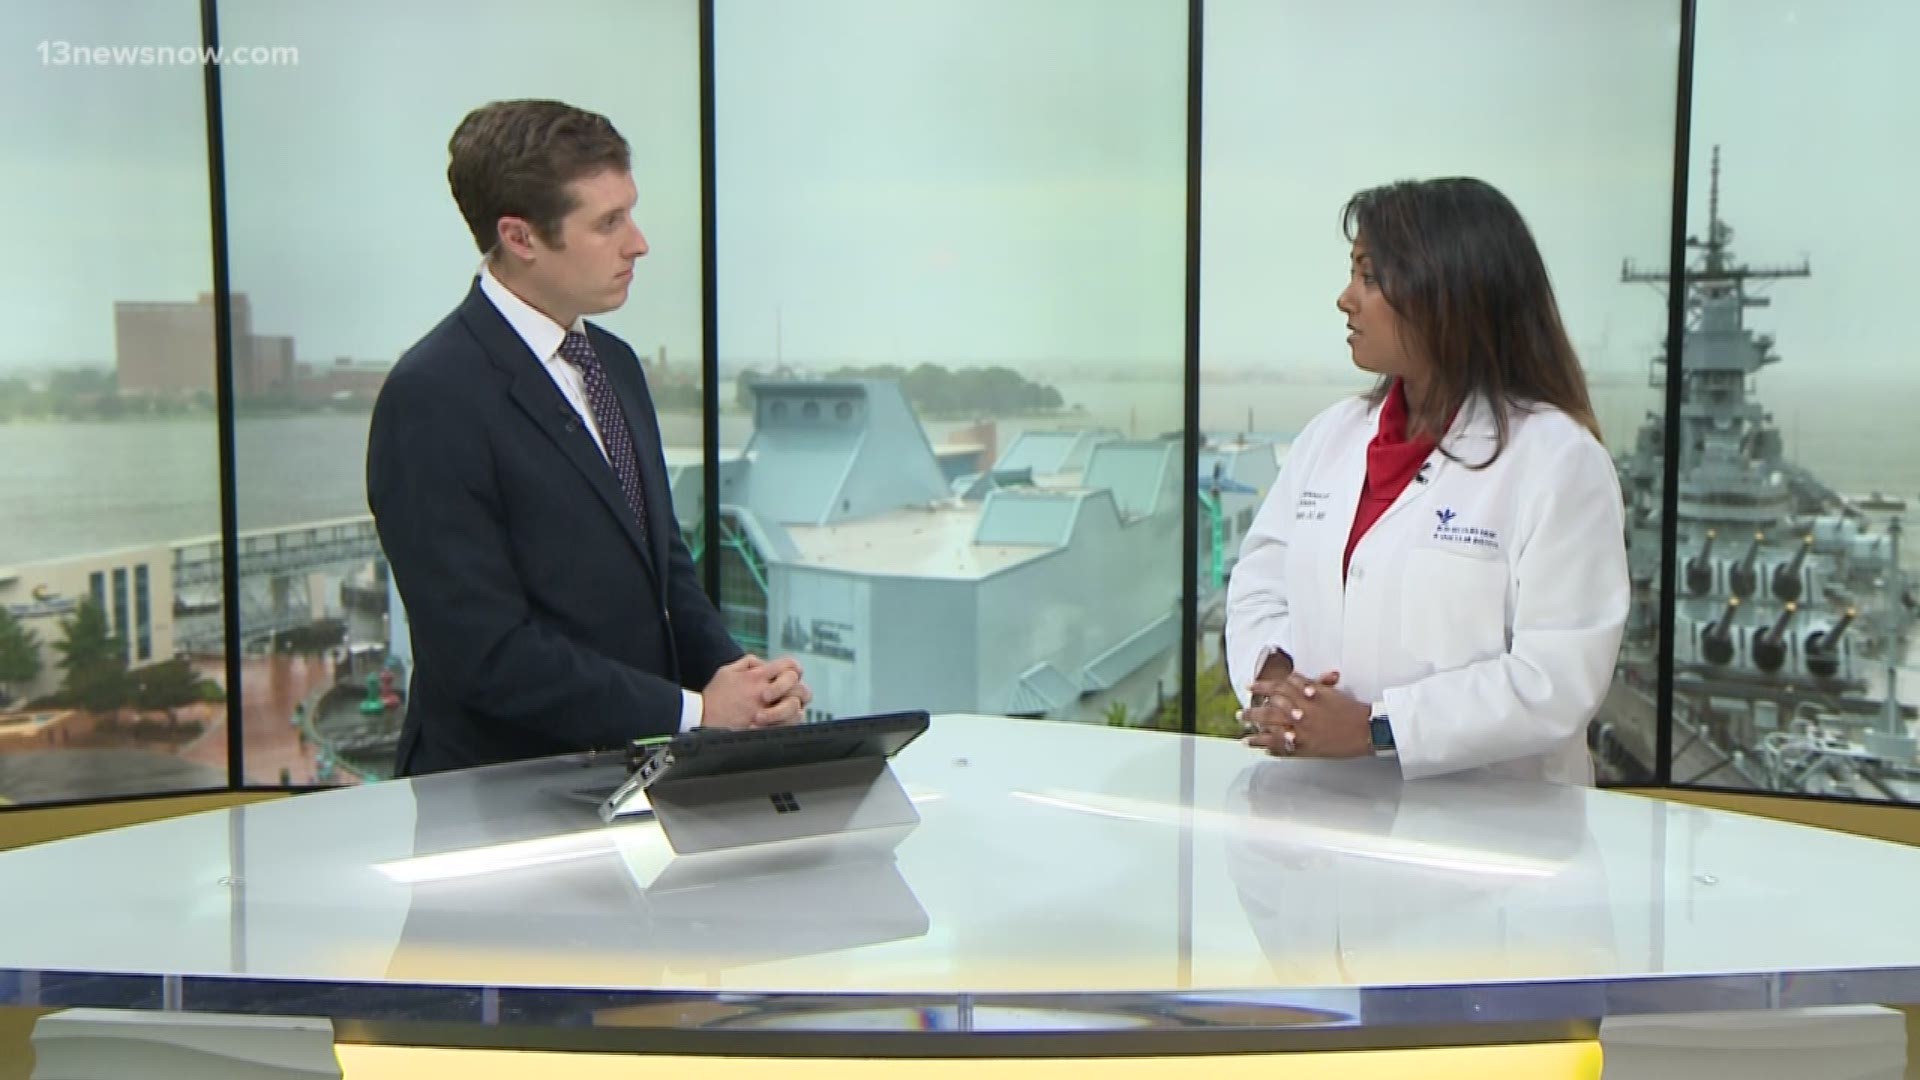 13News Now Dan Kennedy sat down with Doctor Krishnan who gave some tips on how to spot signs of a heart attack to raise awareness for heart health.